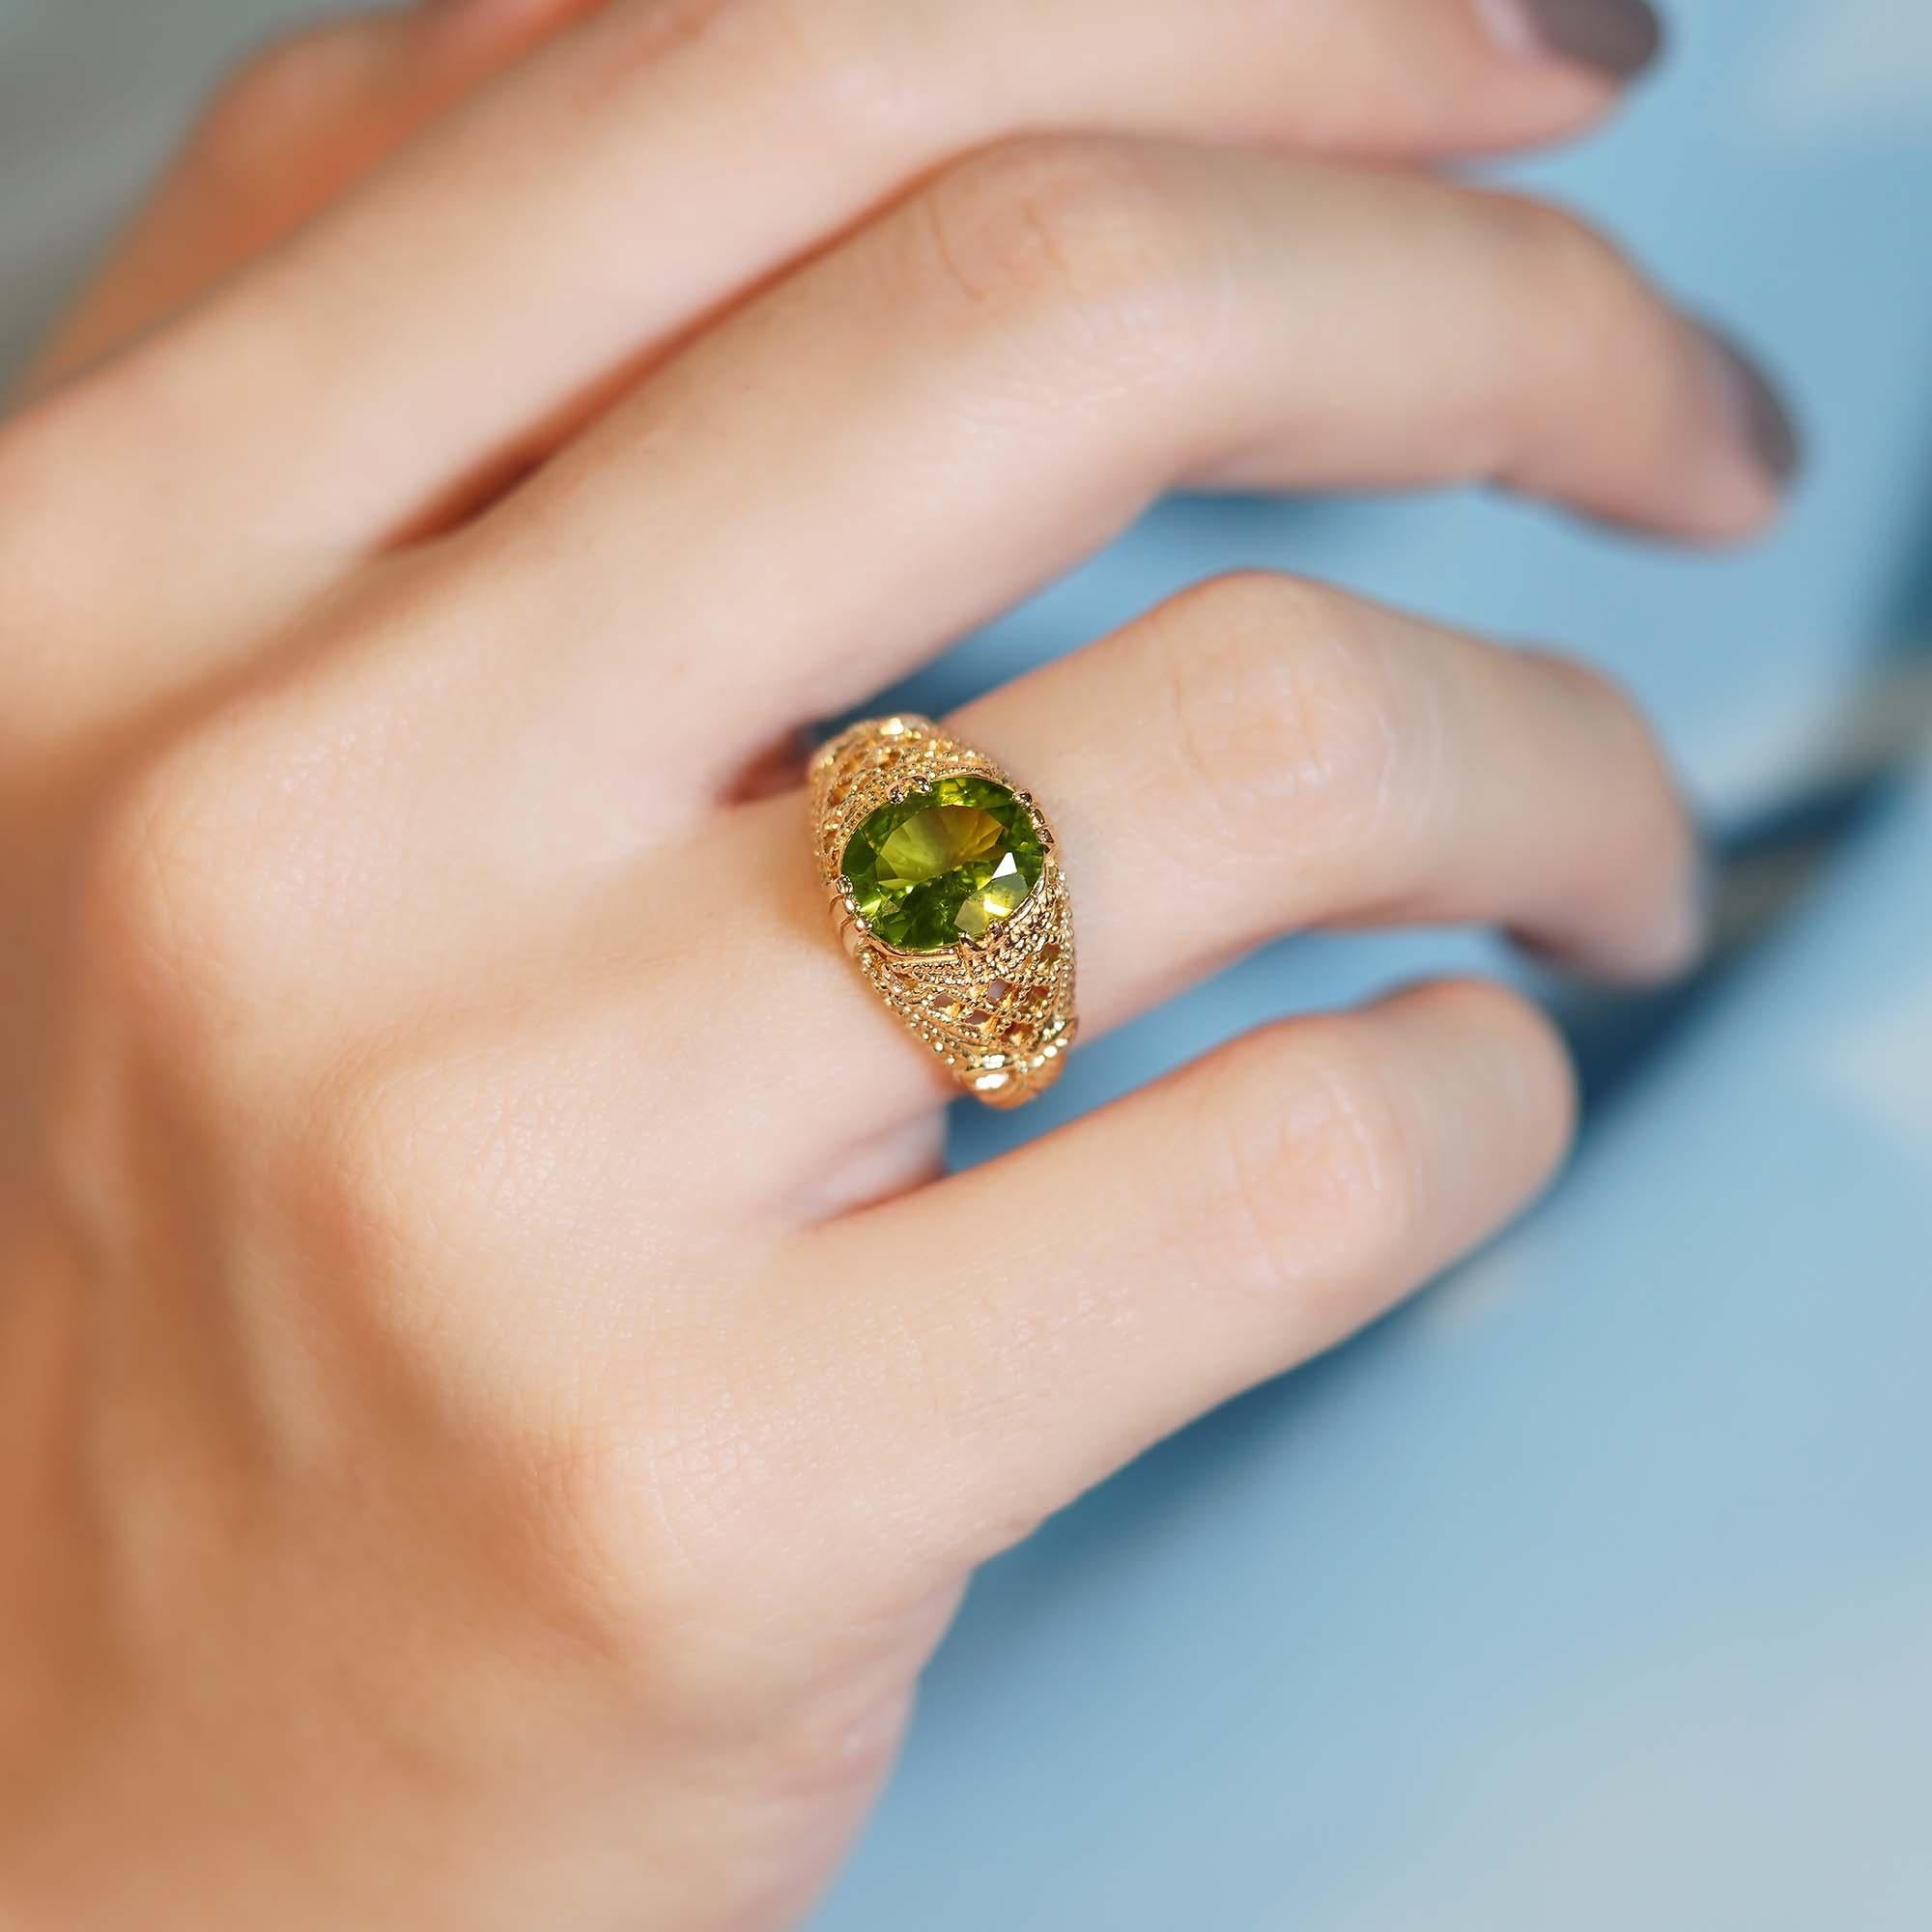 For Sale:  Natural Peridot Vintage Style Filigree Cocktail Ring in 9K Yellow Gold 8